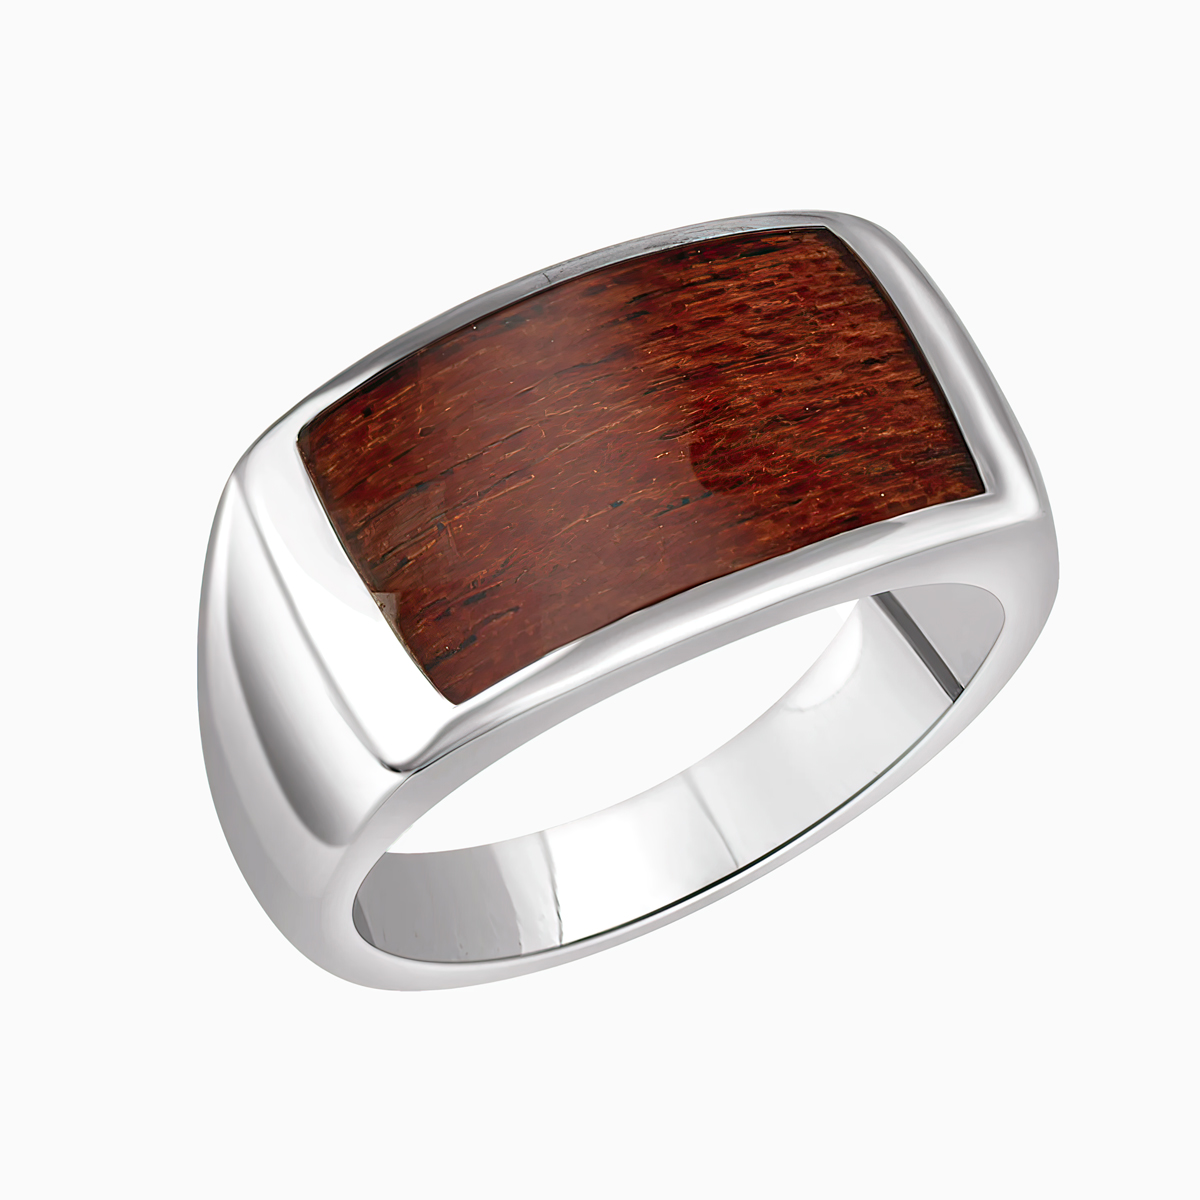 Wild Cherrywood inlay top men's signet ring, Sterling Silver